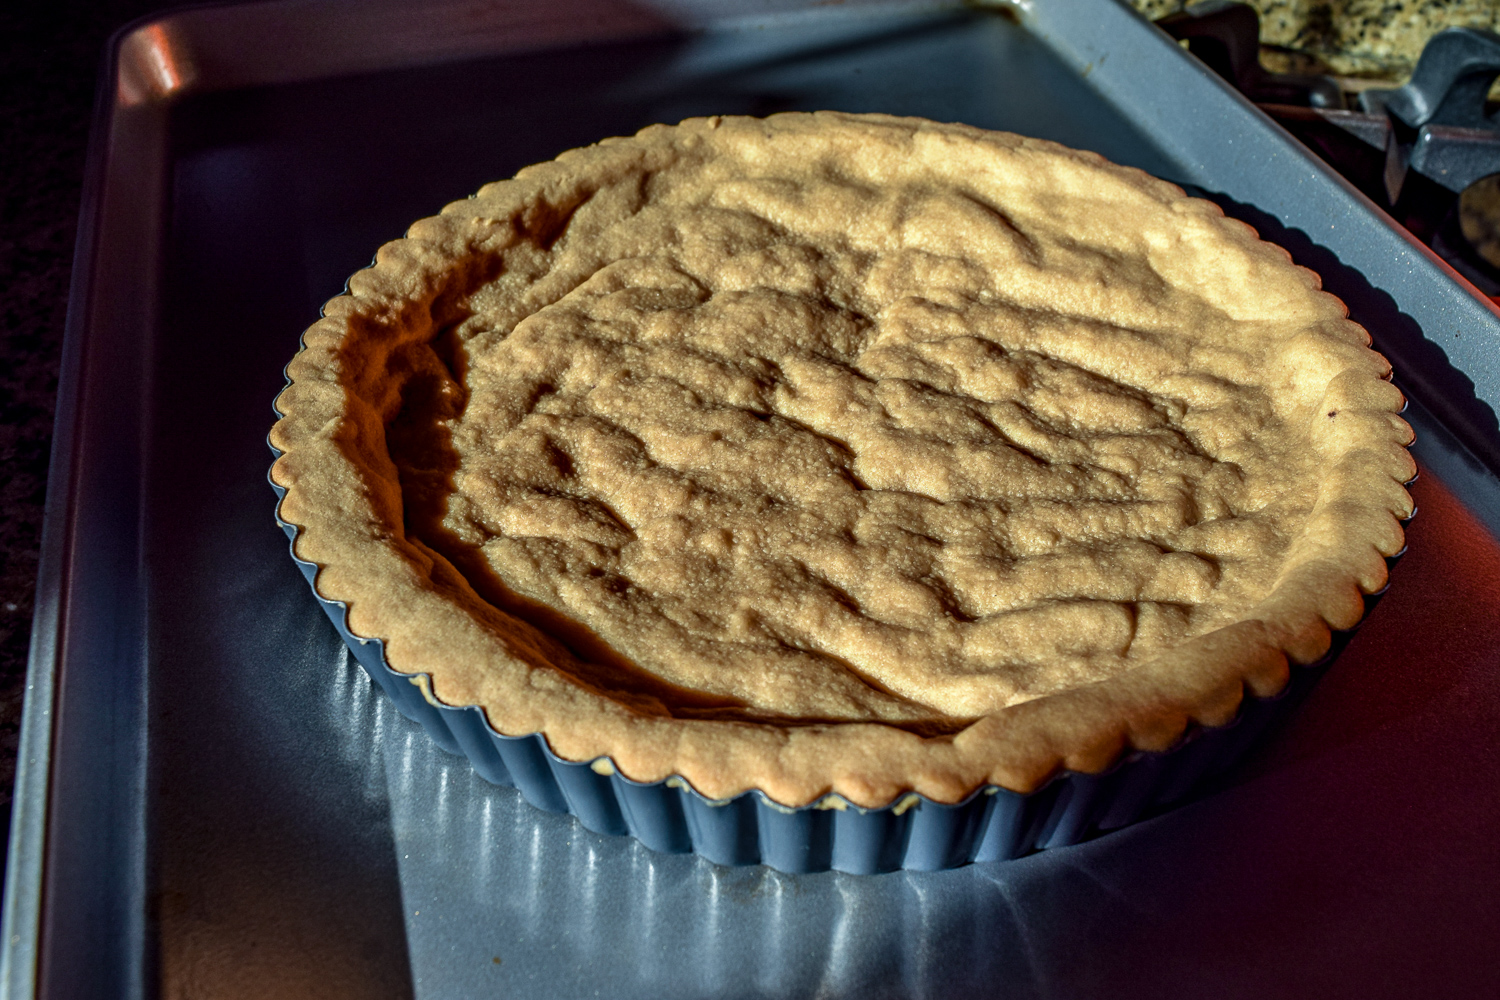 Blind baked shortbread crust for Spicy Mexican Hot-Chocolate Ganache Tart